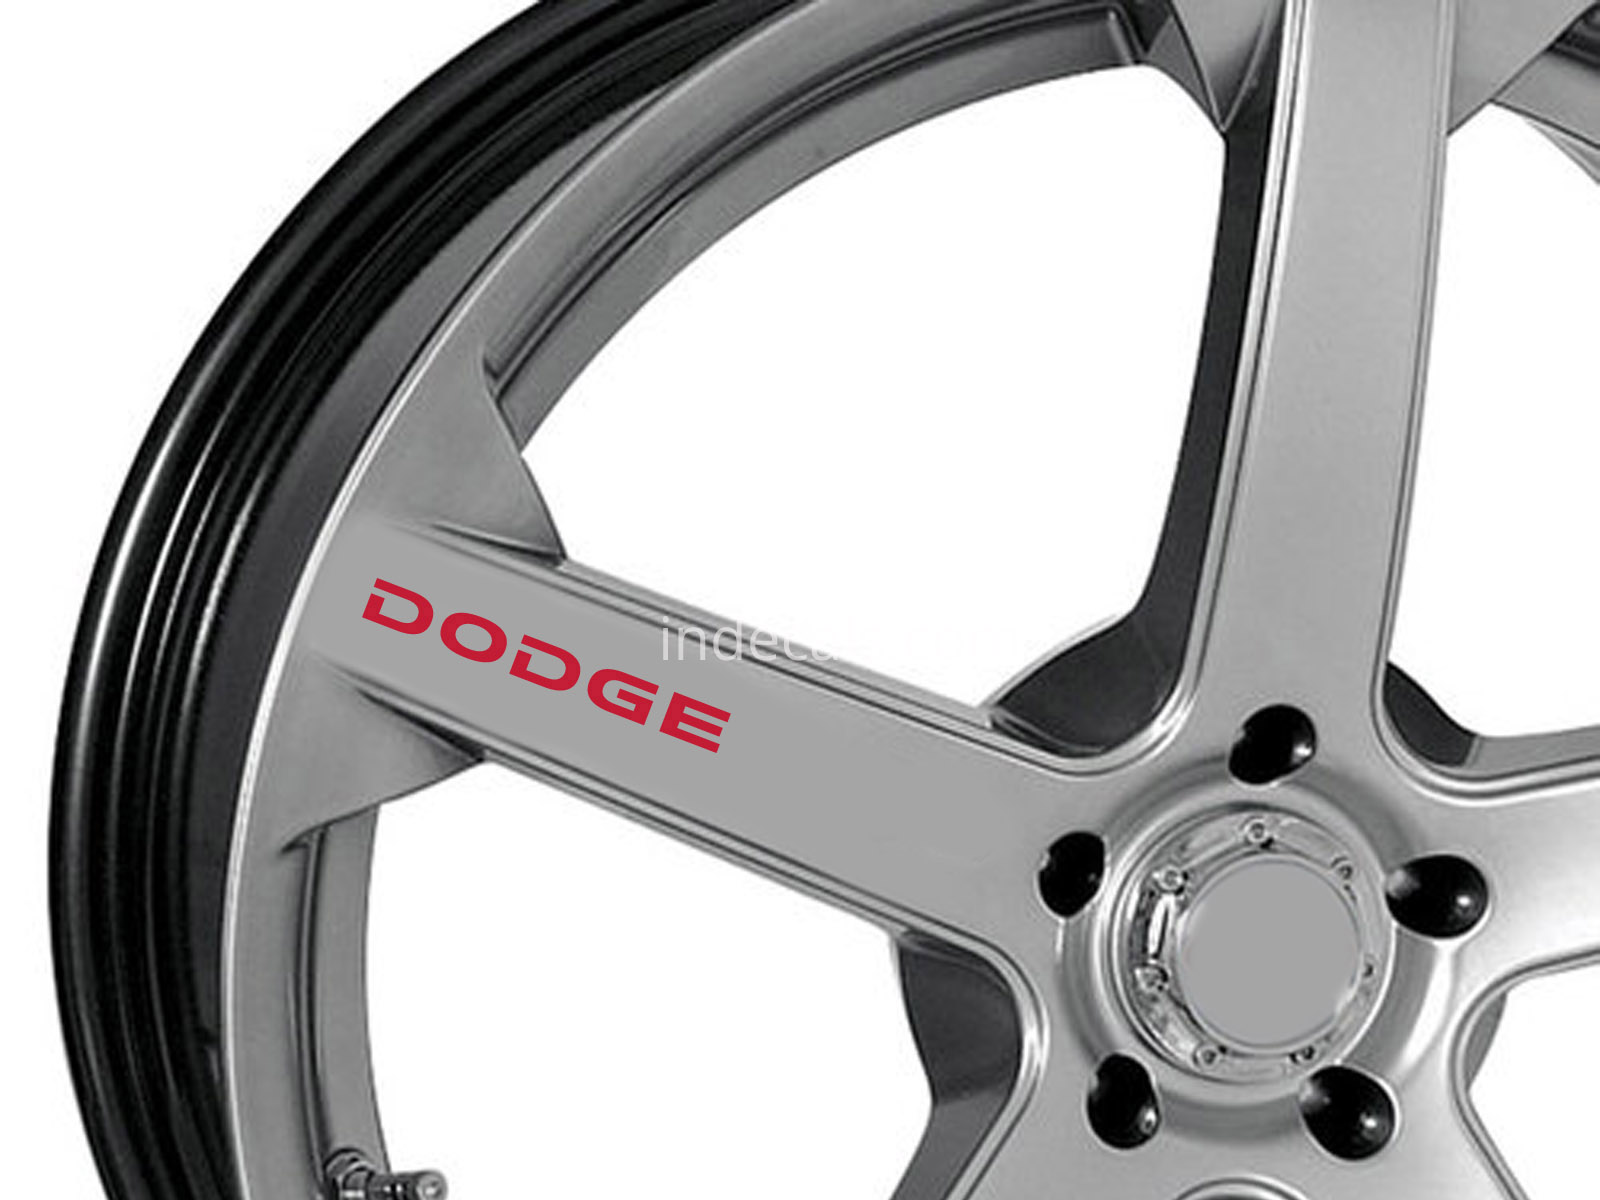 6 x Dodge Stickers for Wheels - Red